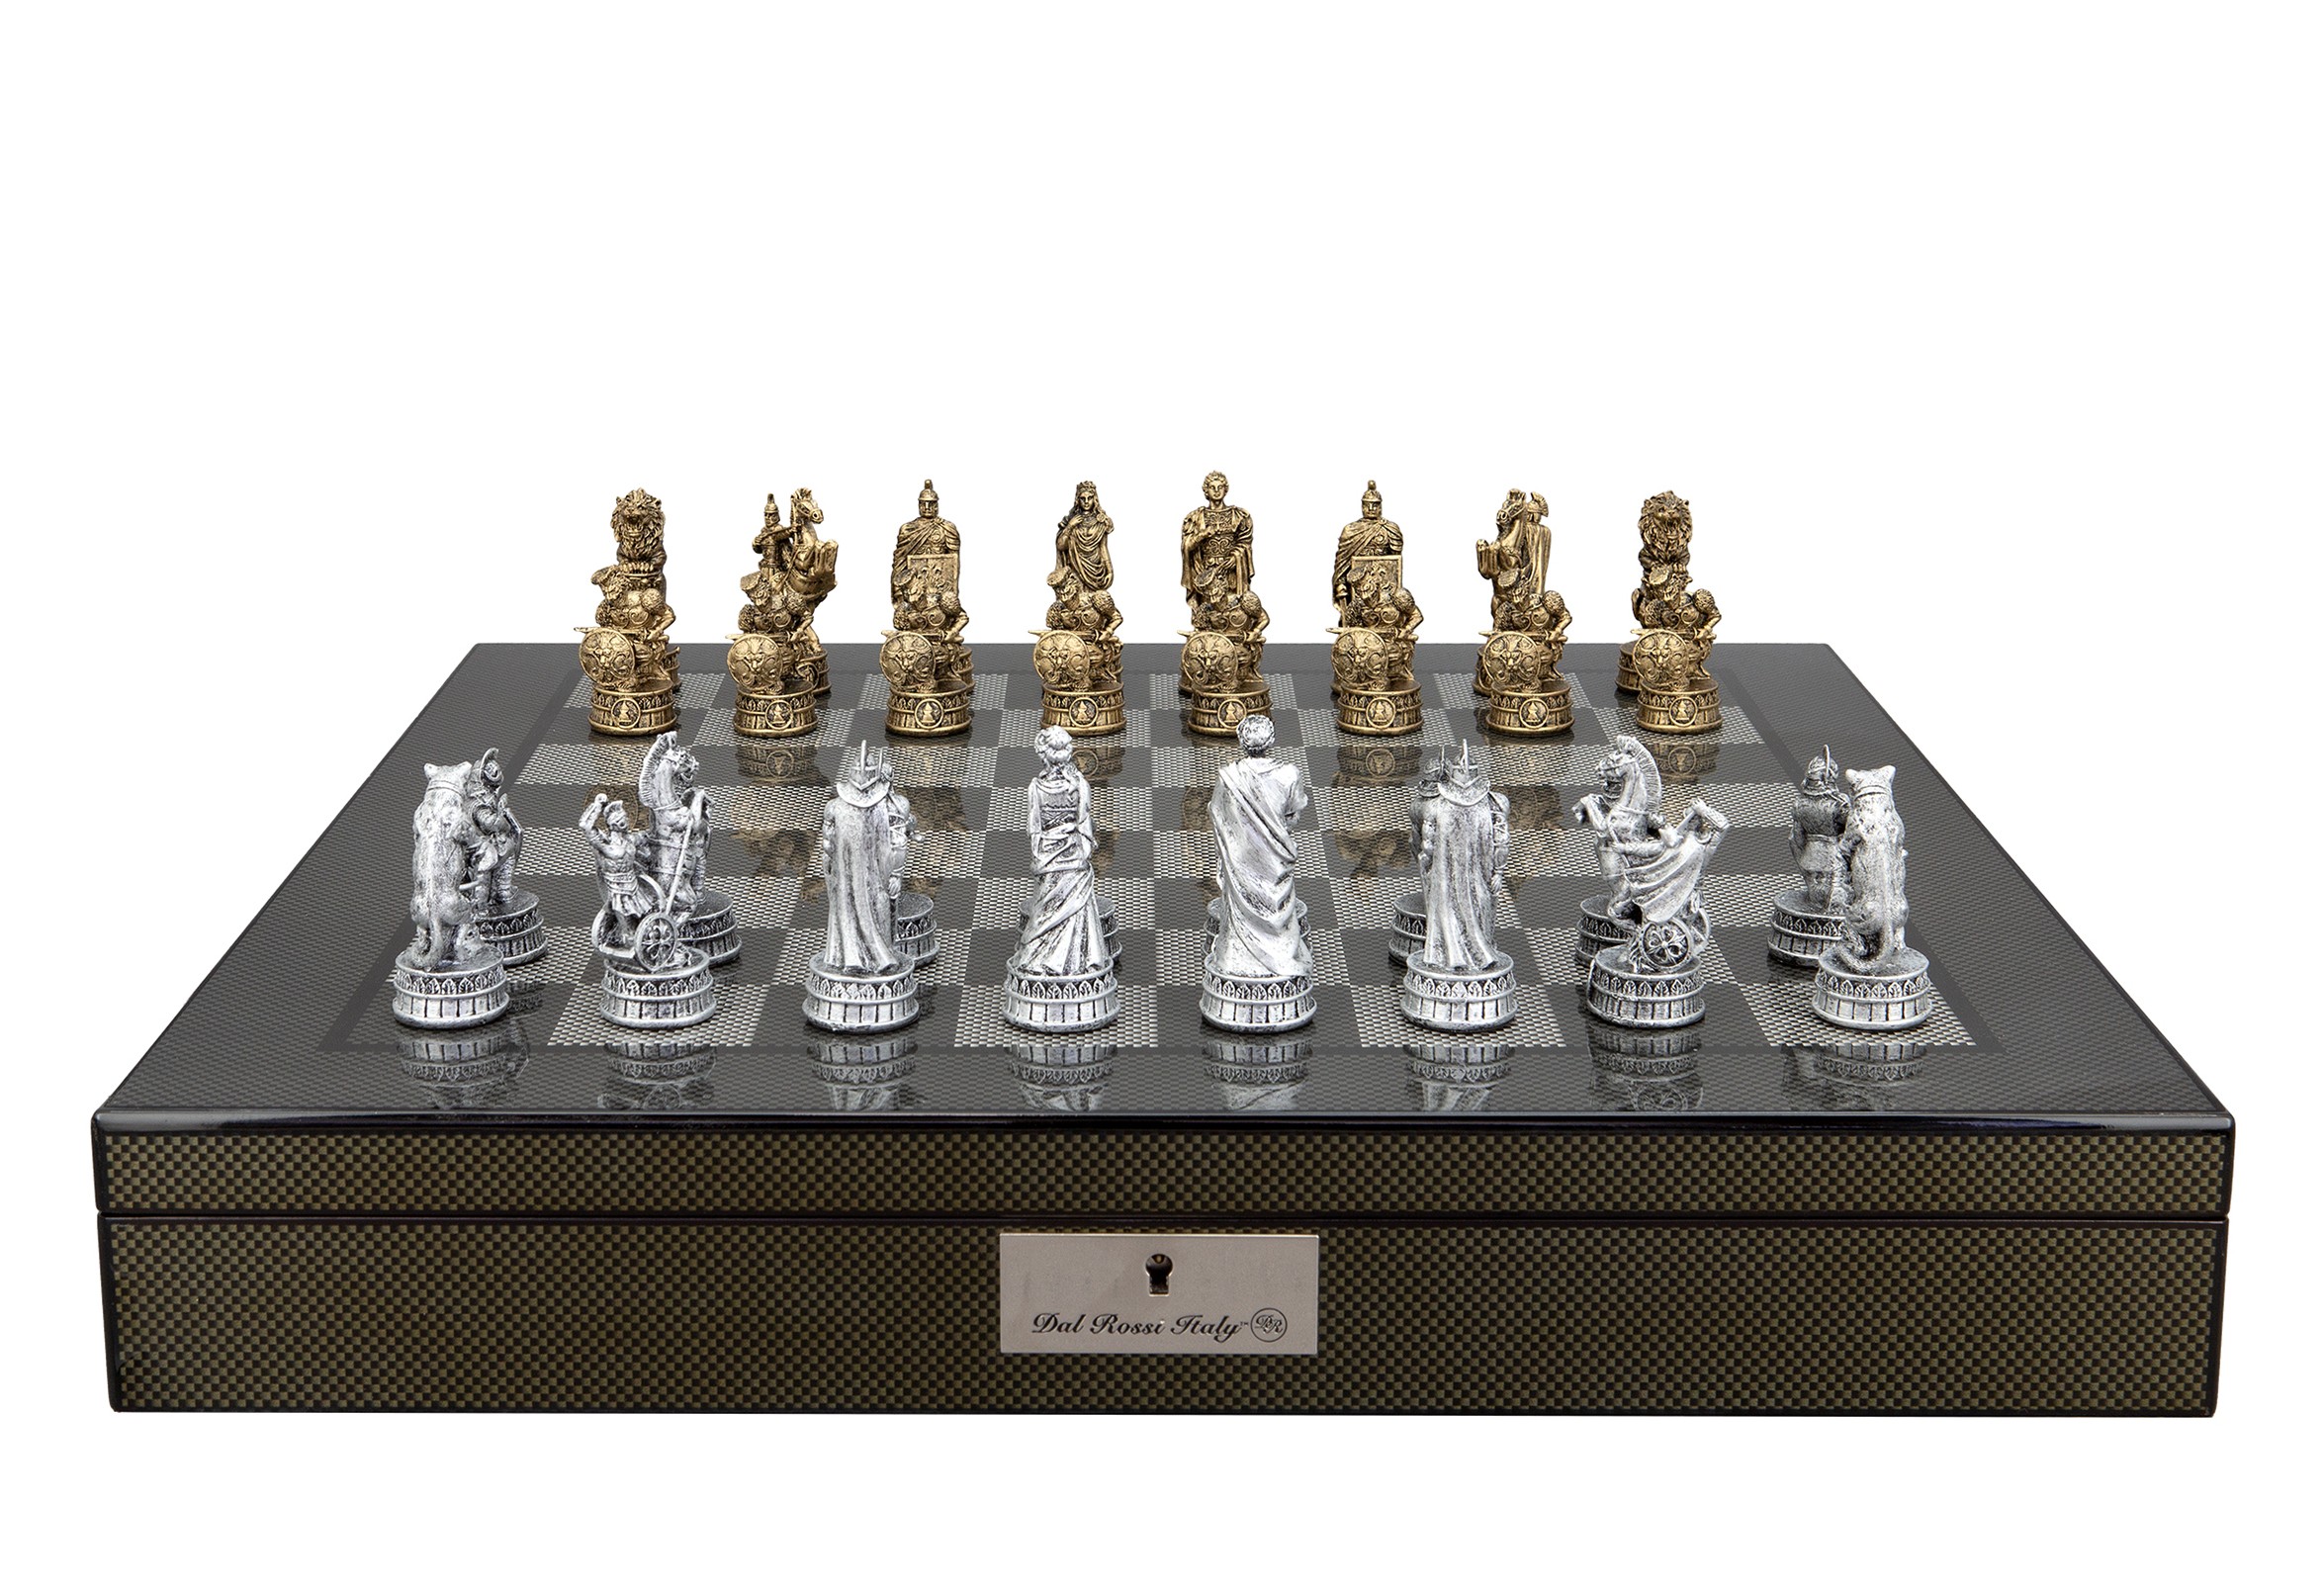 Dal Rossi Italy Roman Chessmen on a Carbon Fibre Finish Shiny Chess Box with Compartments 20"